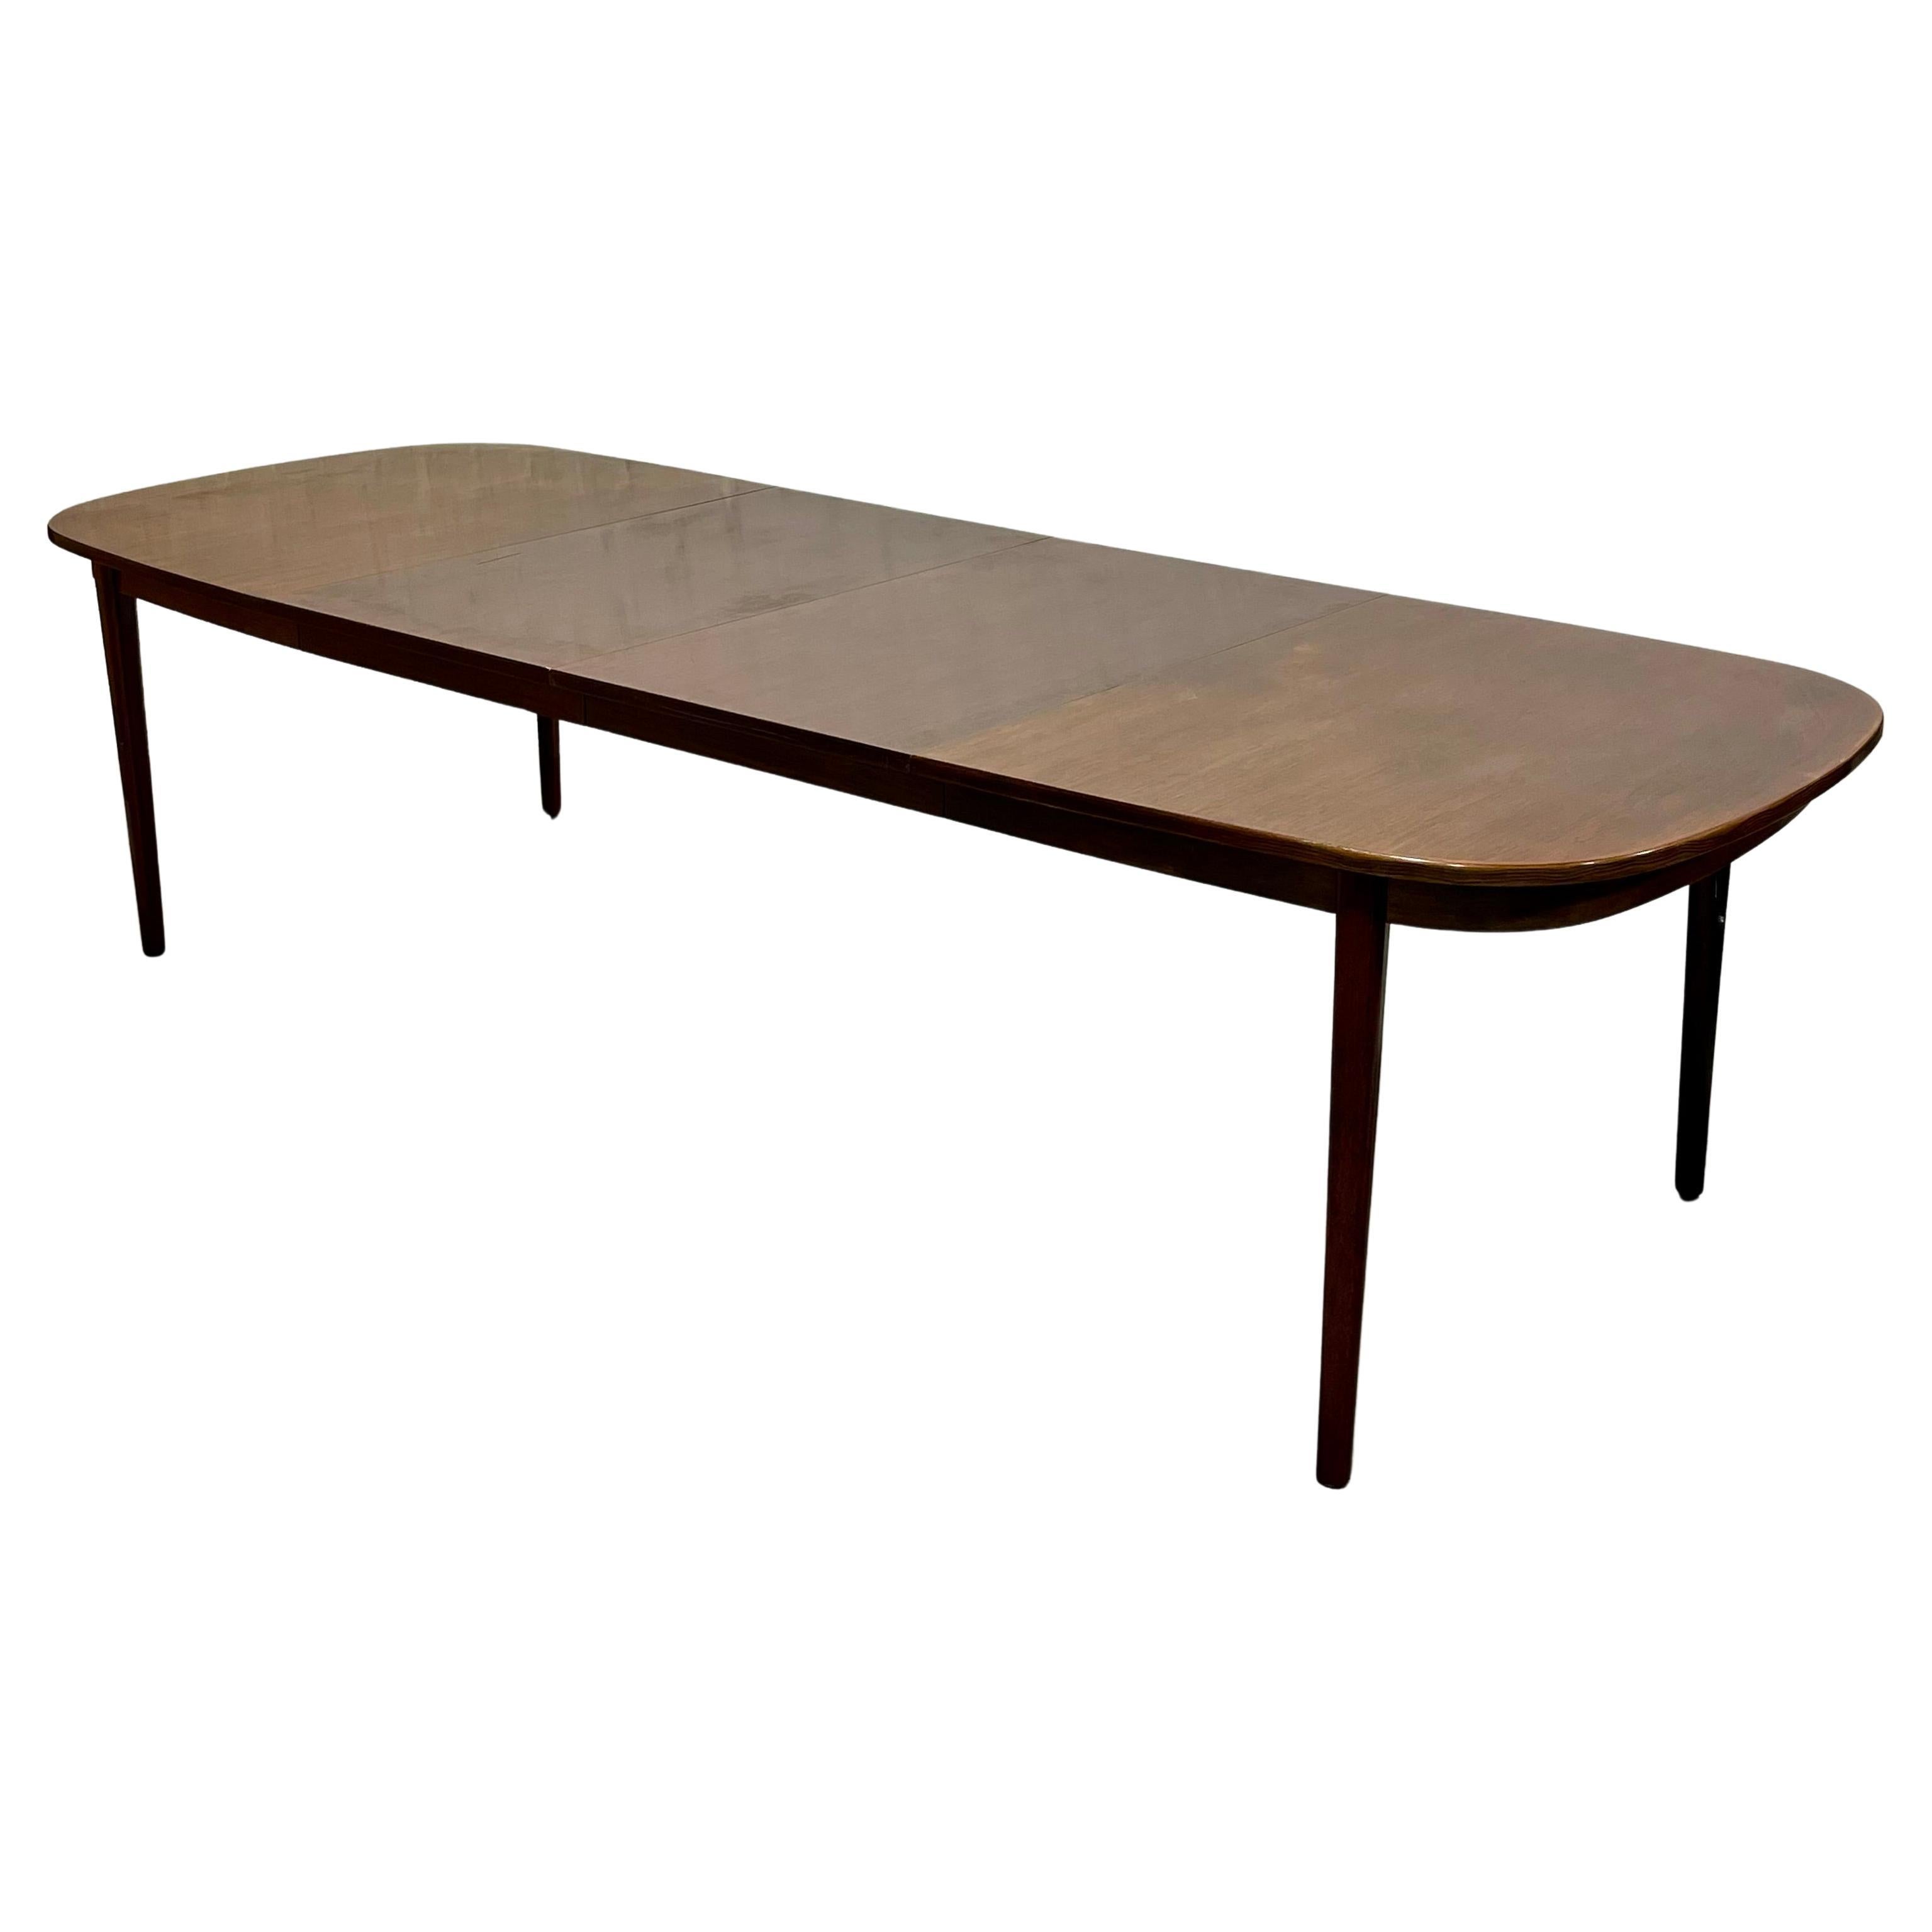 Extra LONG Mid Century Modern ROSEWOOD DINING Table, c. 1960’s For Sale